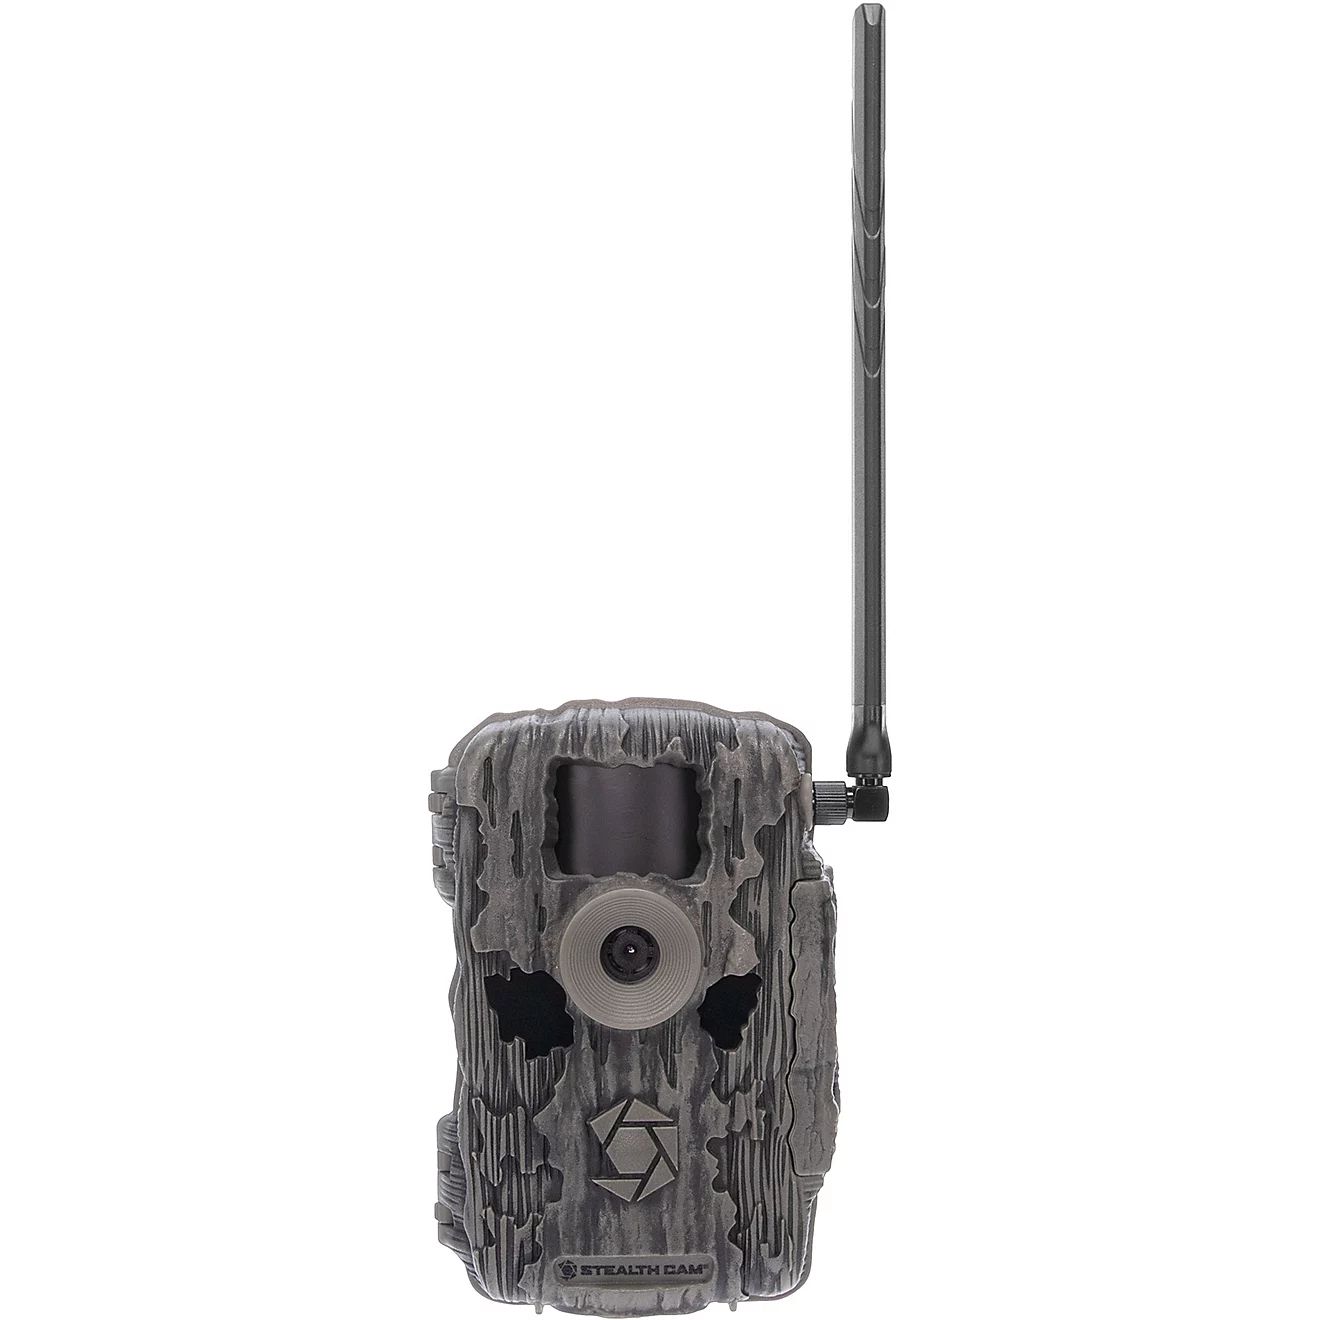 Stealth Cam 36mp Fusion Cellular Trail Camera | Academy | Academy Sports + Outdoors